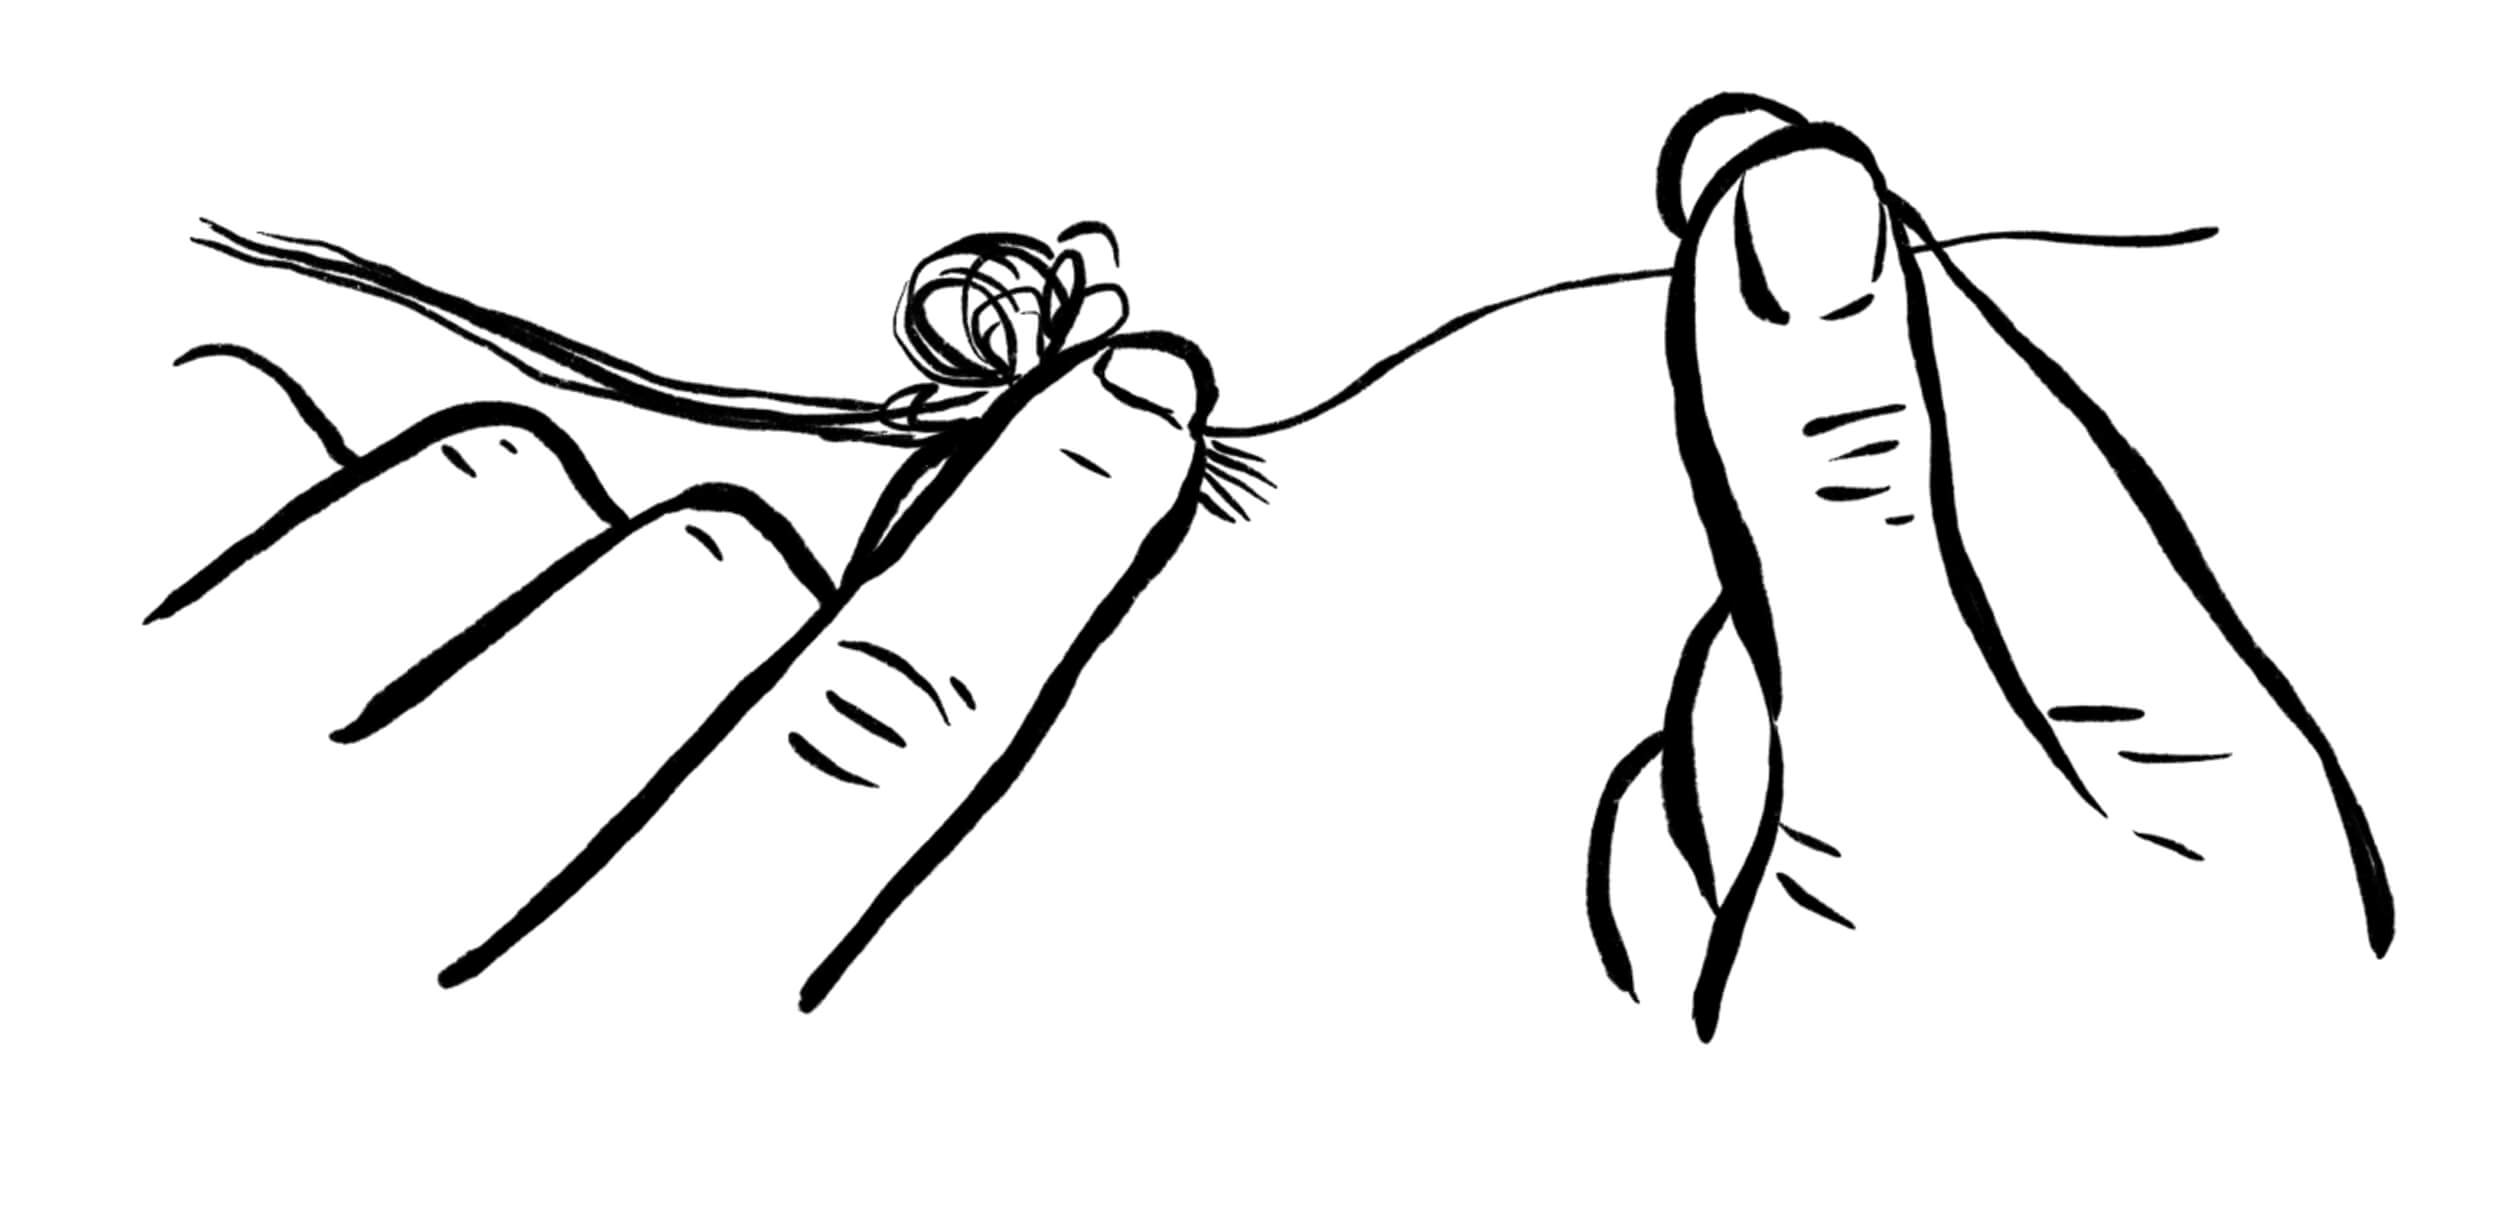 drawing of a hand pulling out one strand of embroidery floss